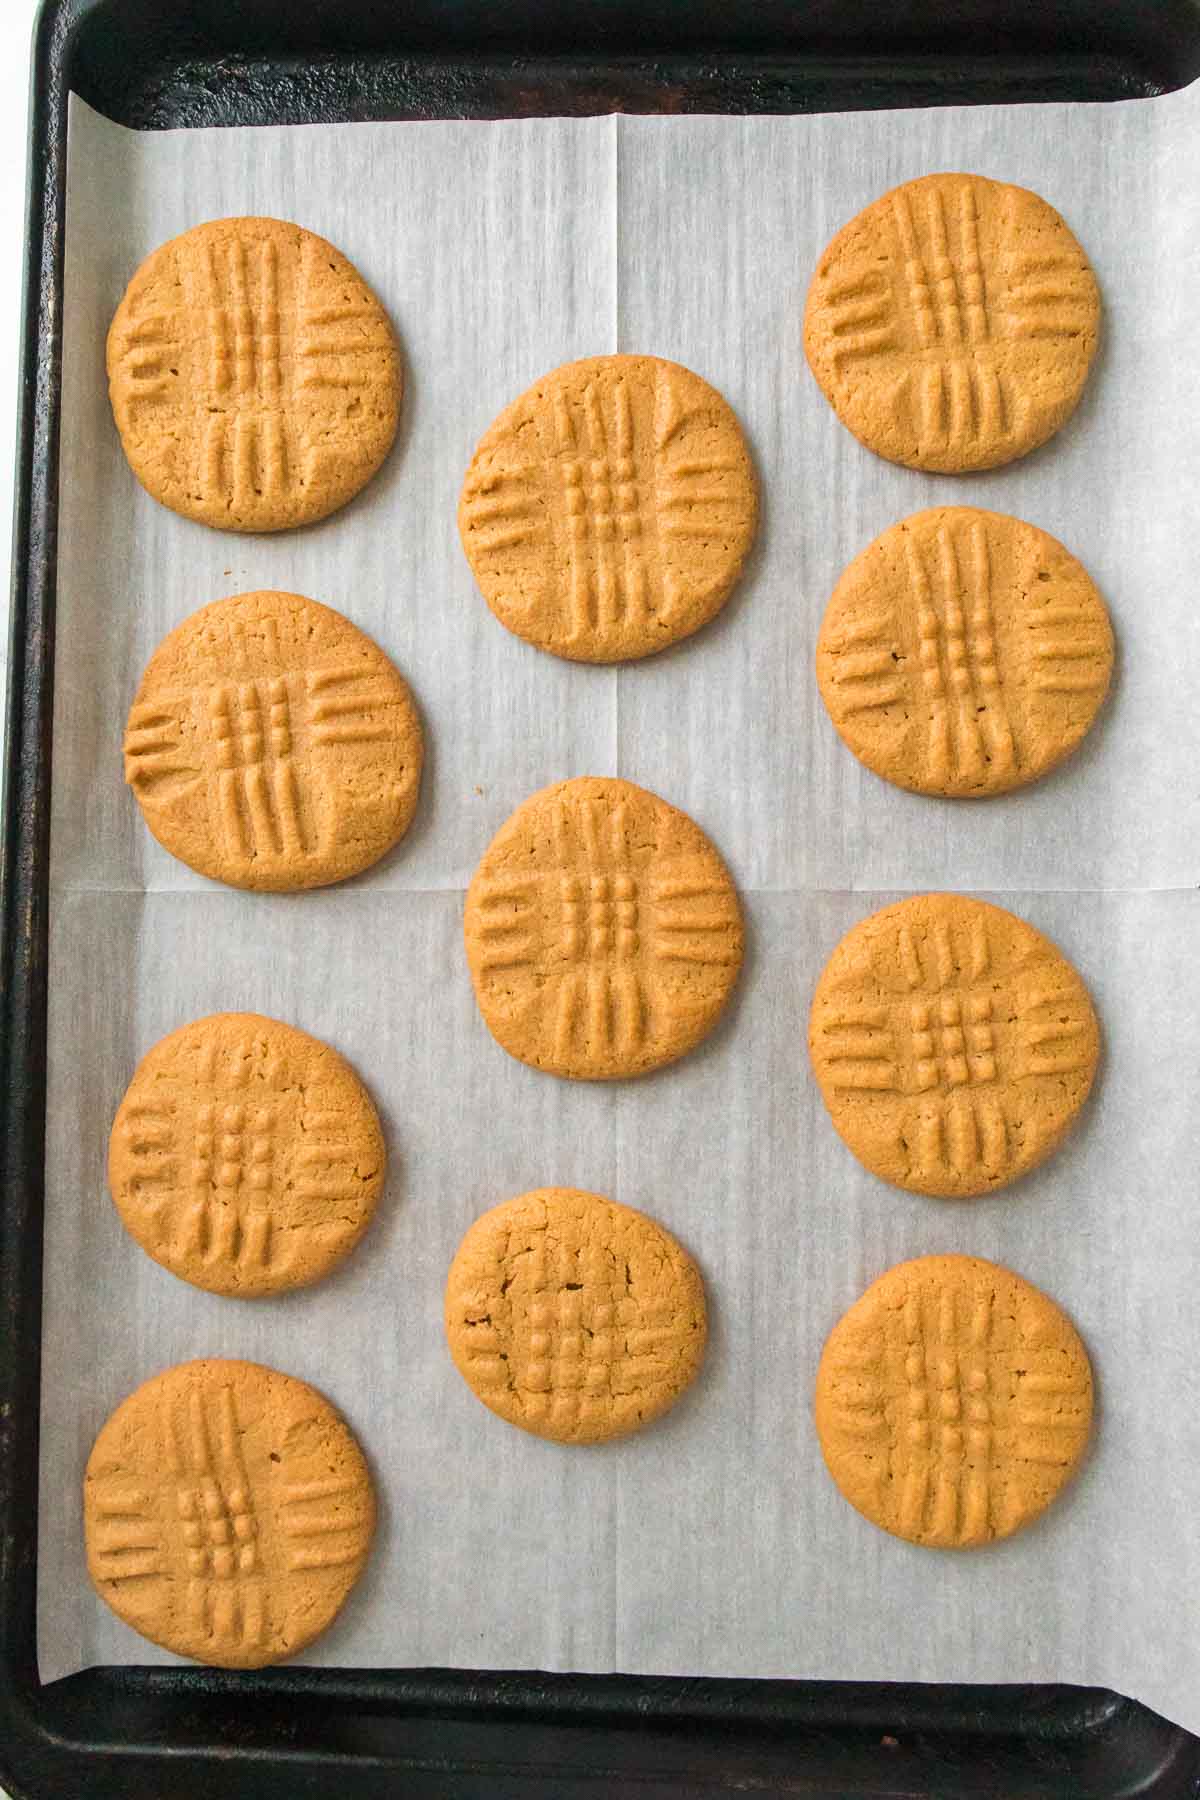 Tray of baked peanut butter cookies